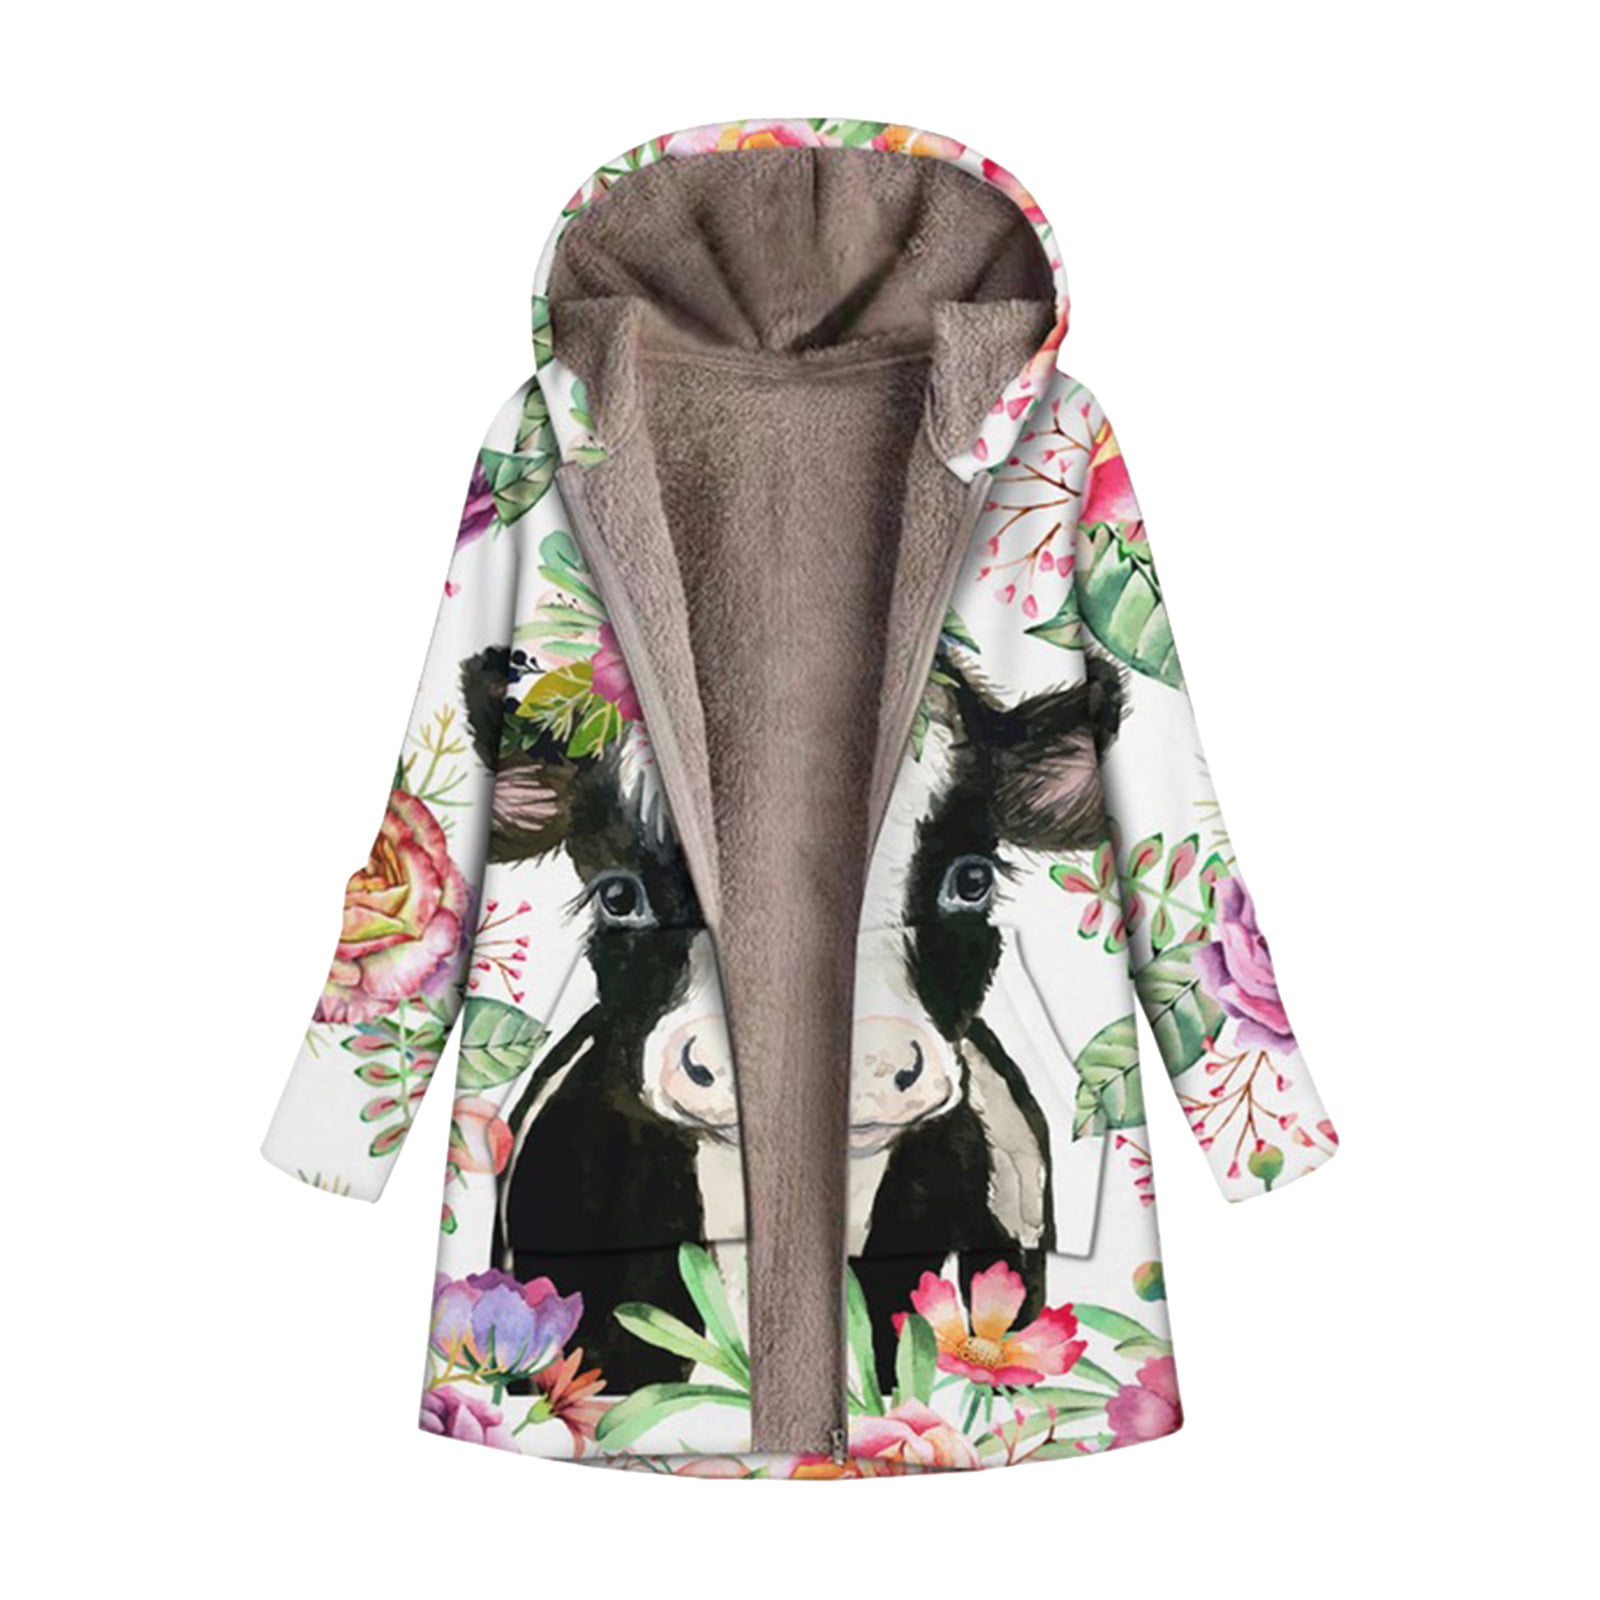 STORTO Winter Hoodie Coat for Women Vintage Floral Print Jacket Plus Size Warm Padded Thick Outerwear with Pockets S-XXL